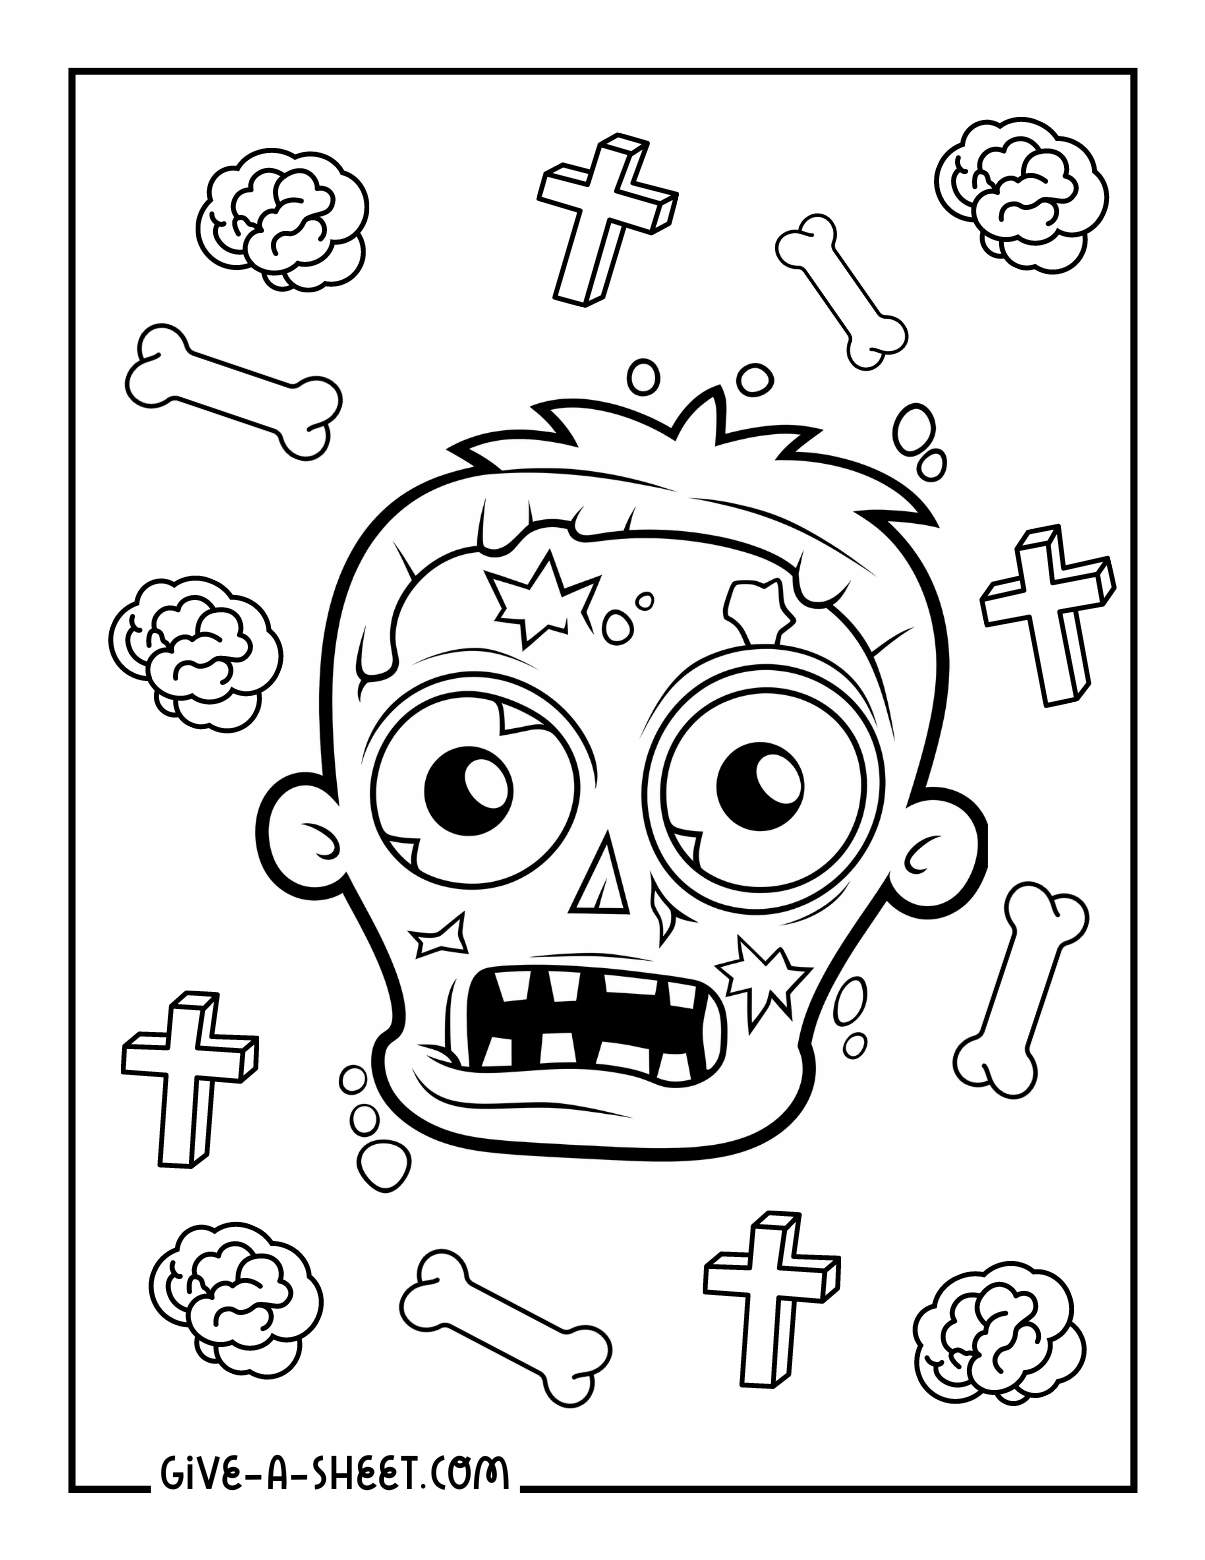 Zombie heads illustrations coloring page.